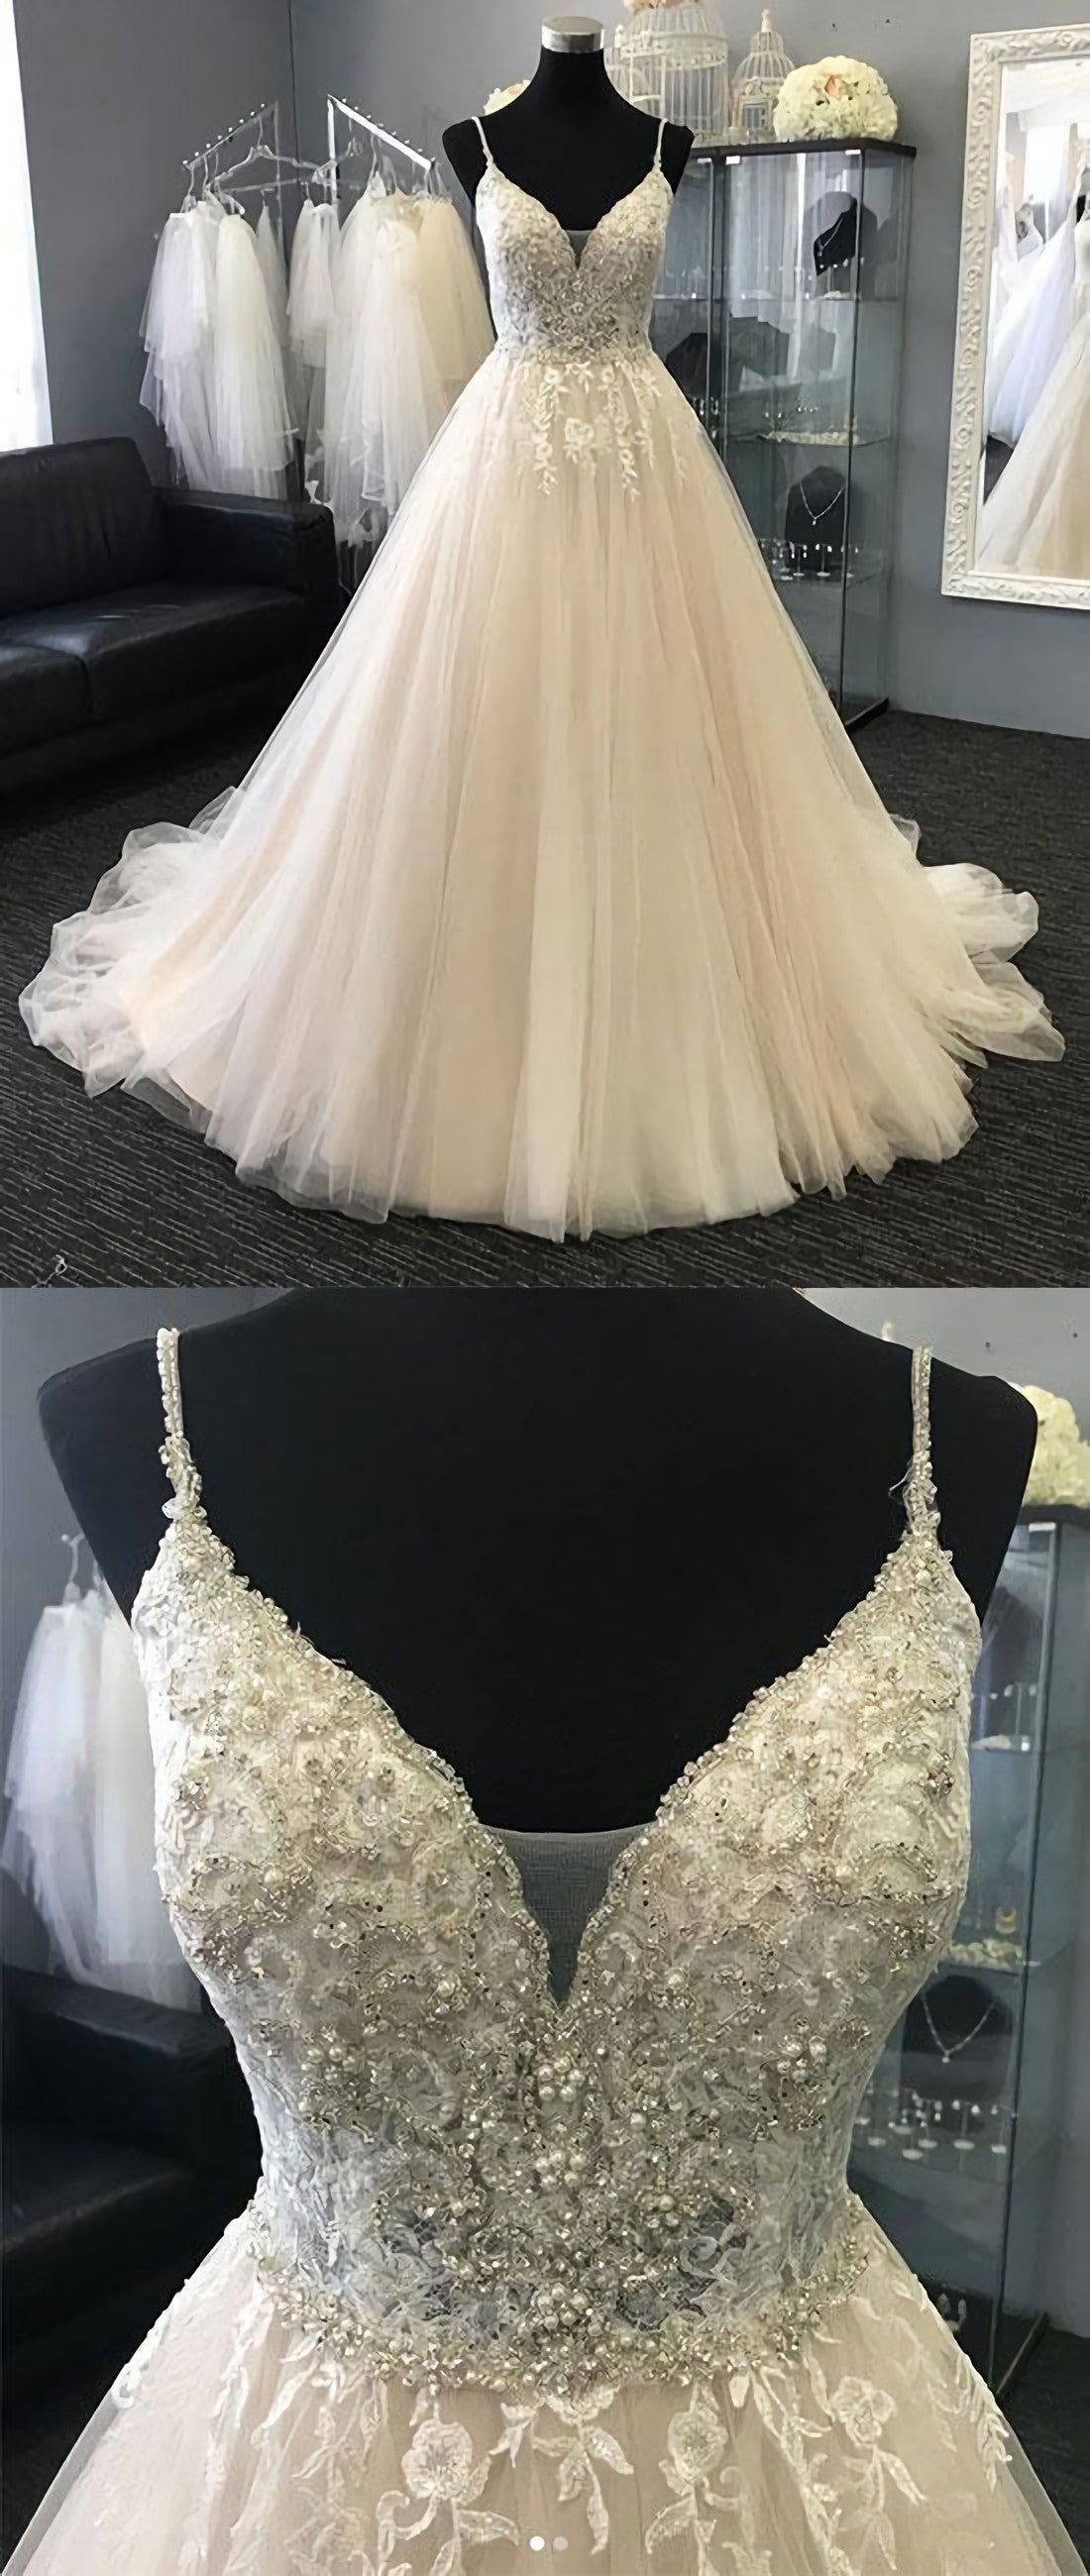 Prom Dresses For Chubby Girls, Light Champagne Tulle Lace Long Prom Dress, Champagne Evening Dress